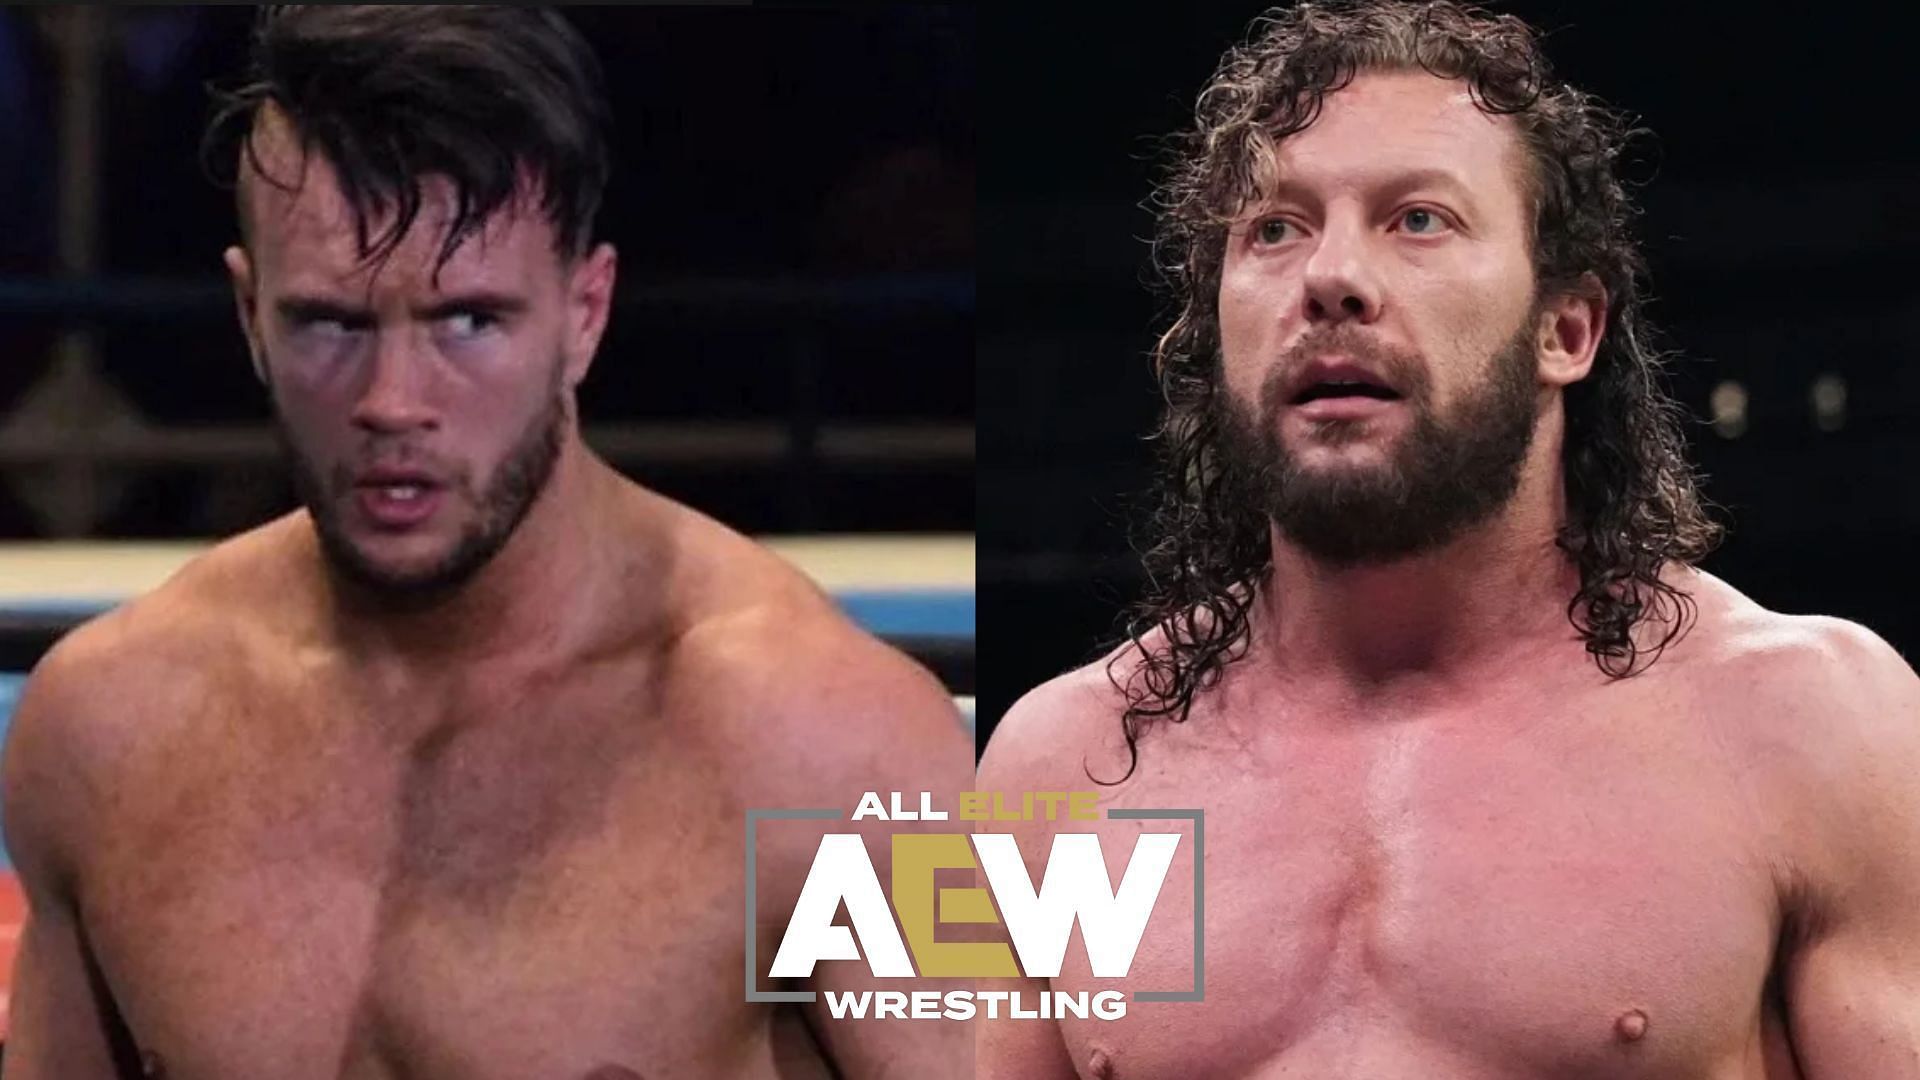 Kenny Omega and Will Ospreay are former IWGP World Heavyweight Champions